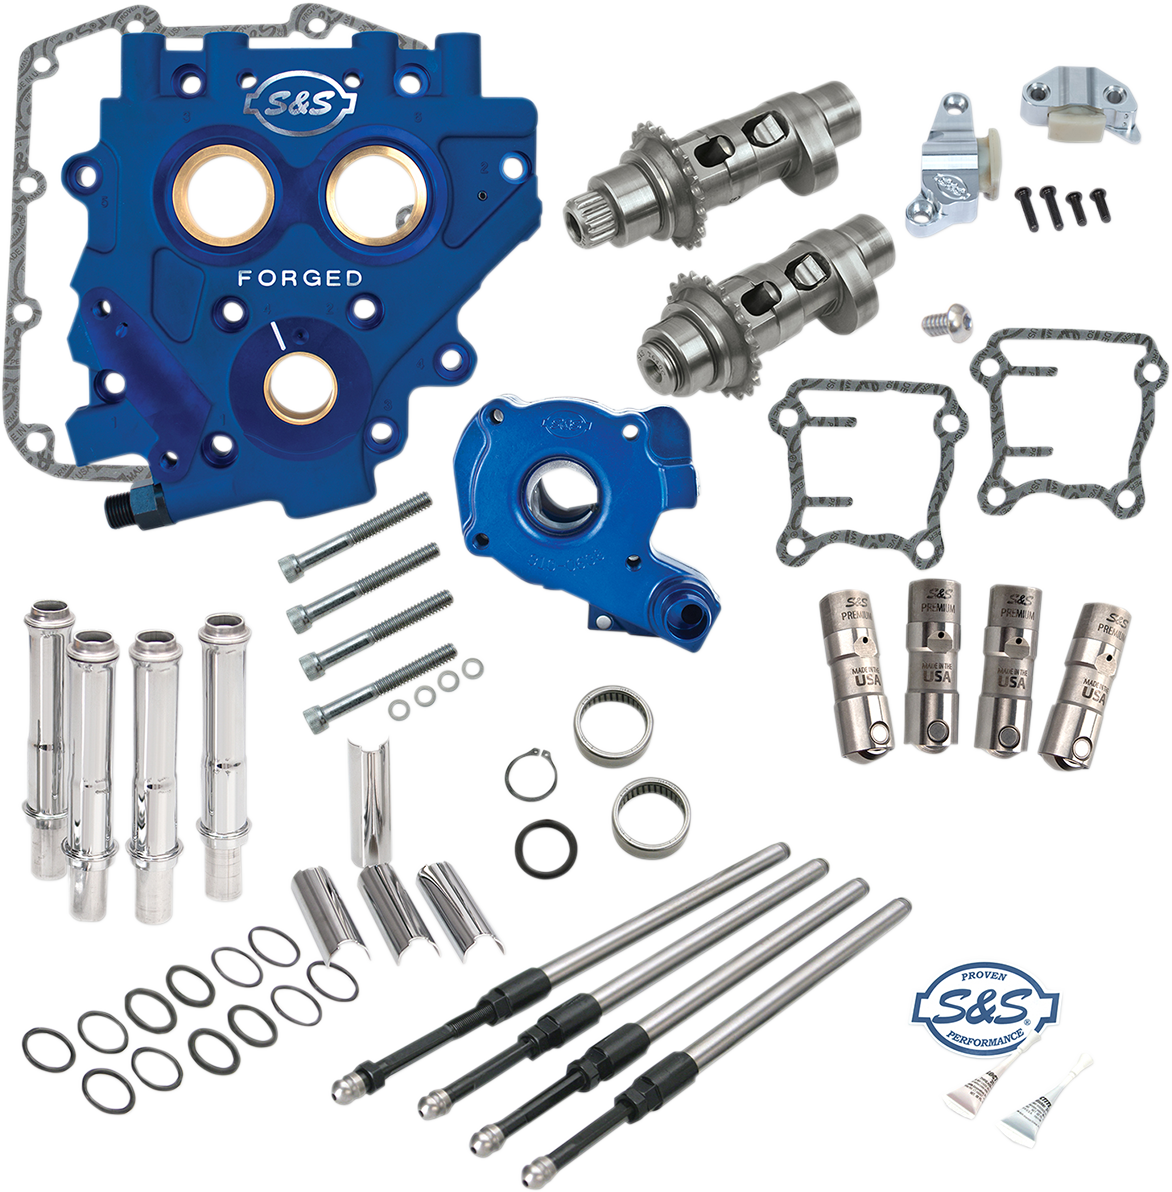 S&S Blue 585 Easy Start Camchest Kit 2006-2017 Harley Dyna Touring Softail FXS